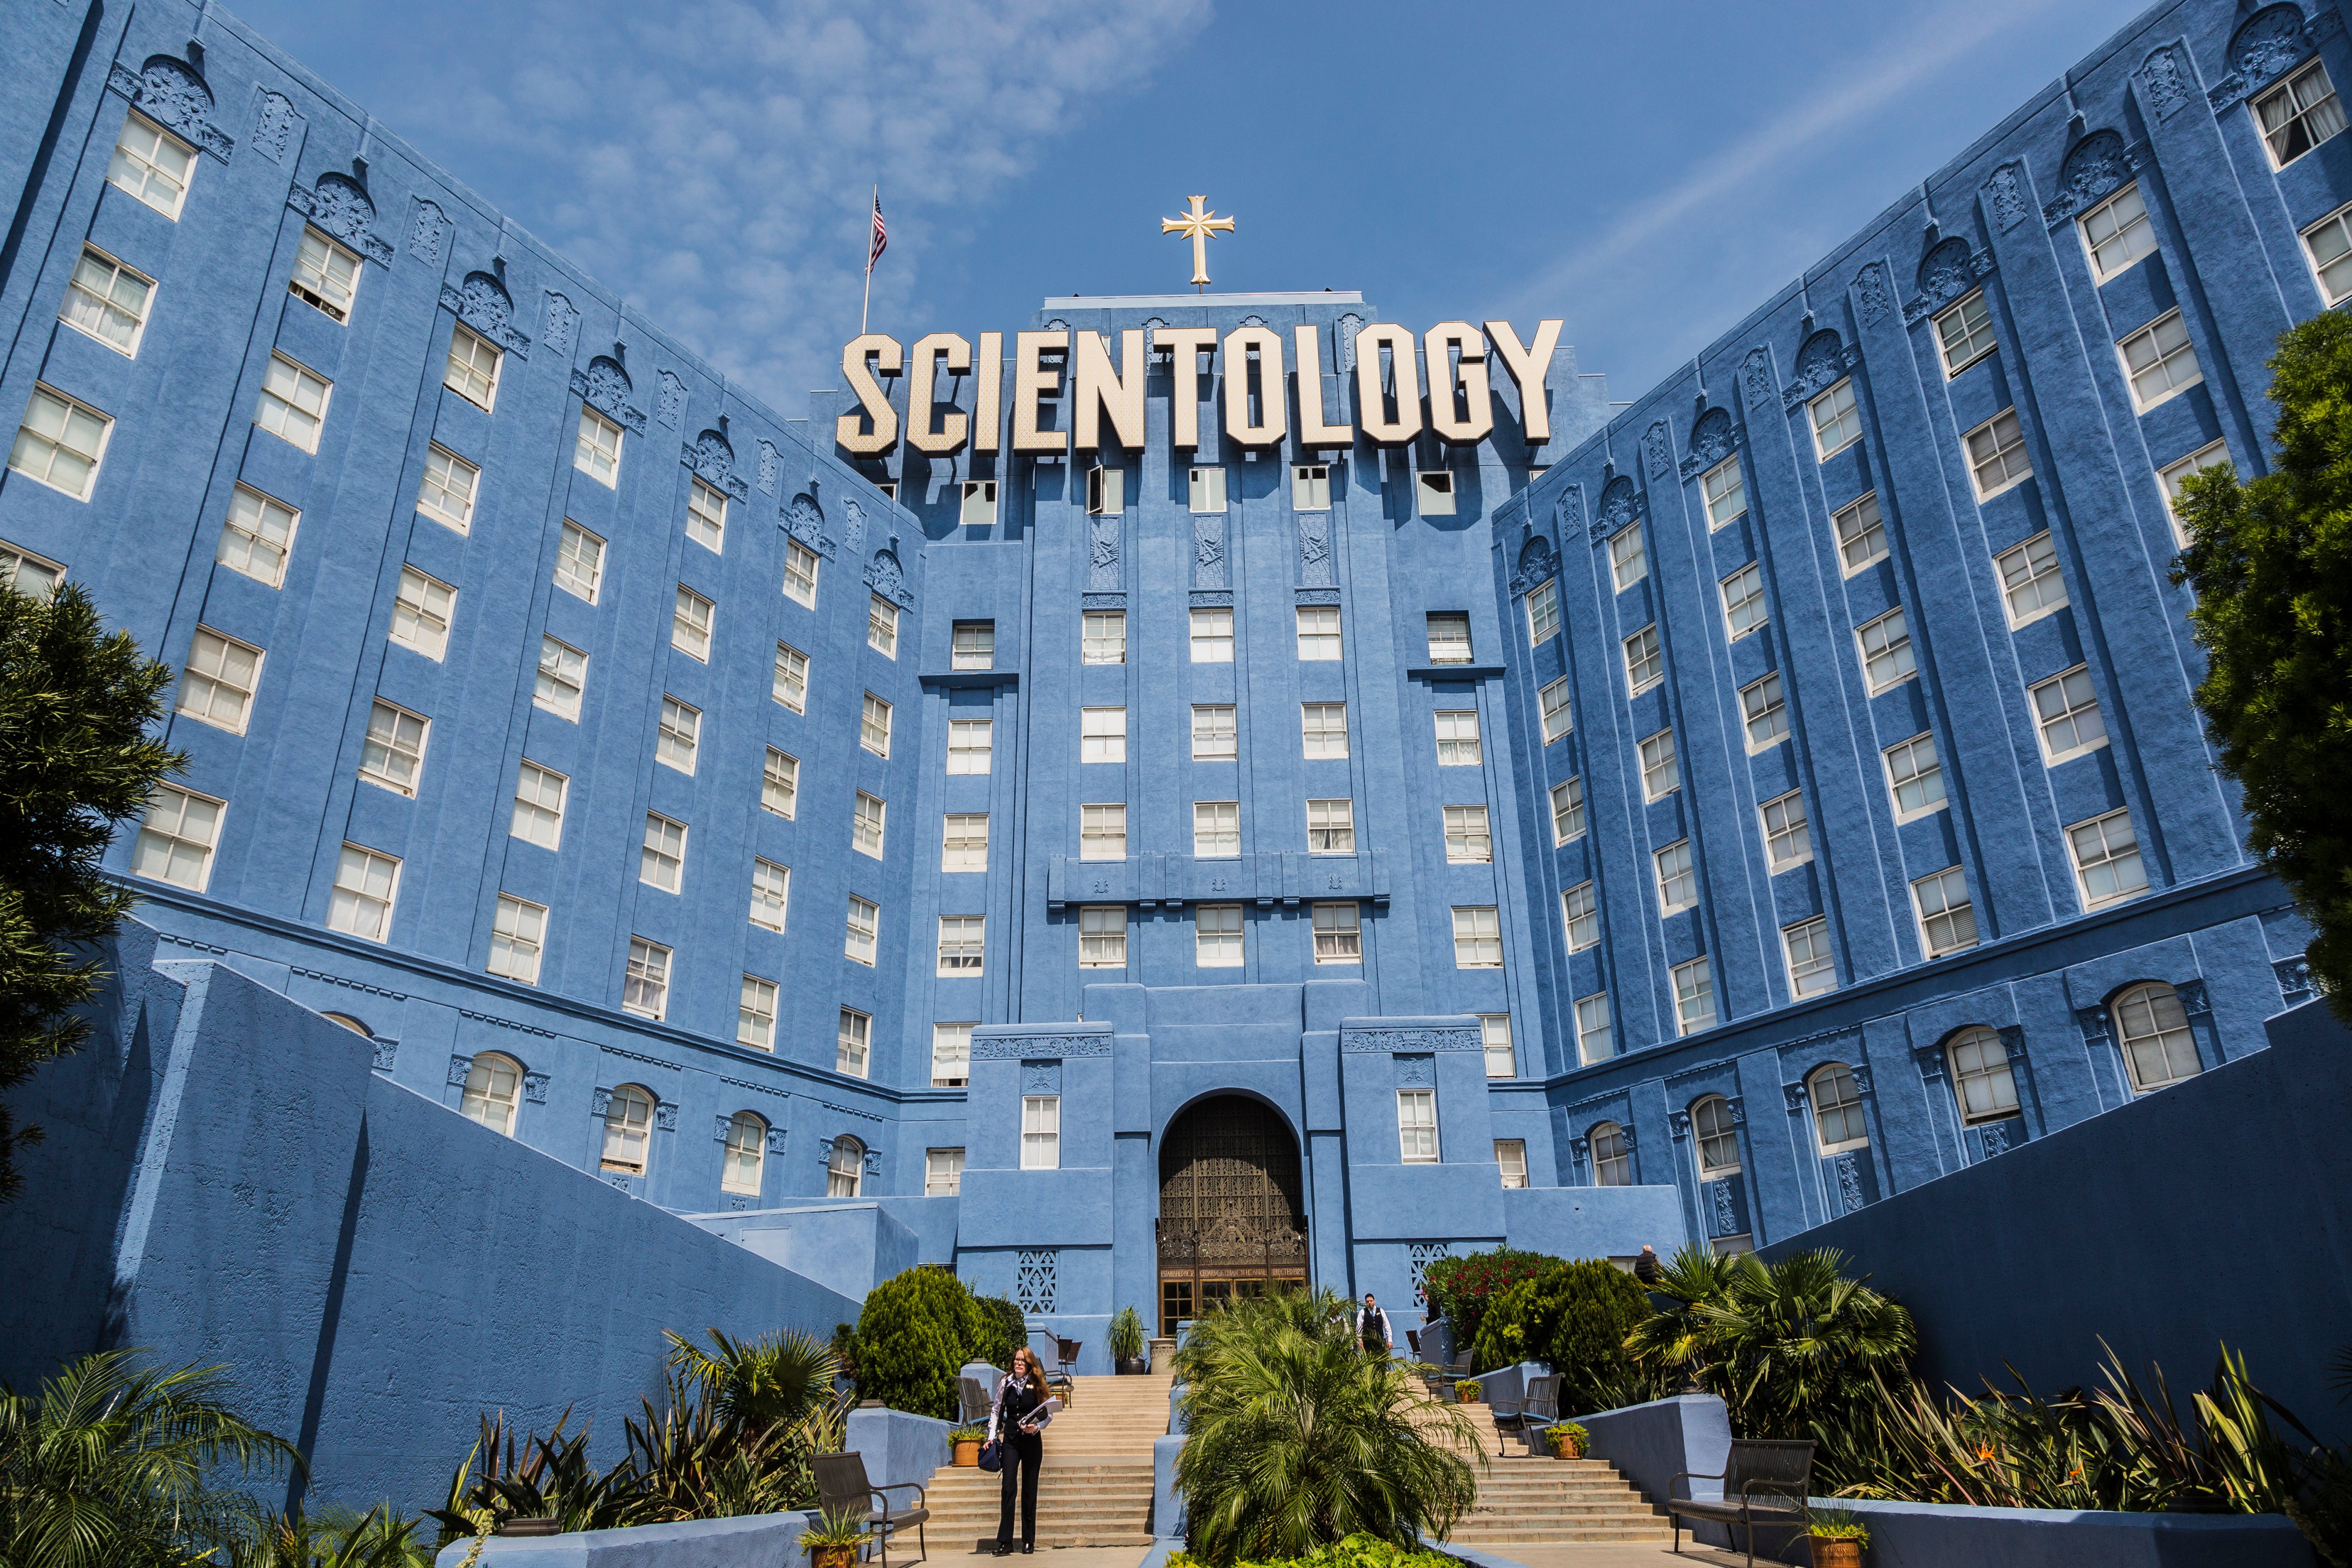 Church of Scientology Building on 4810 Sunset Blvd. in Los Angeles. (Ted Soqui—Corbis/Getty Images)